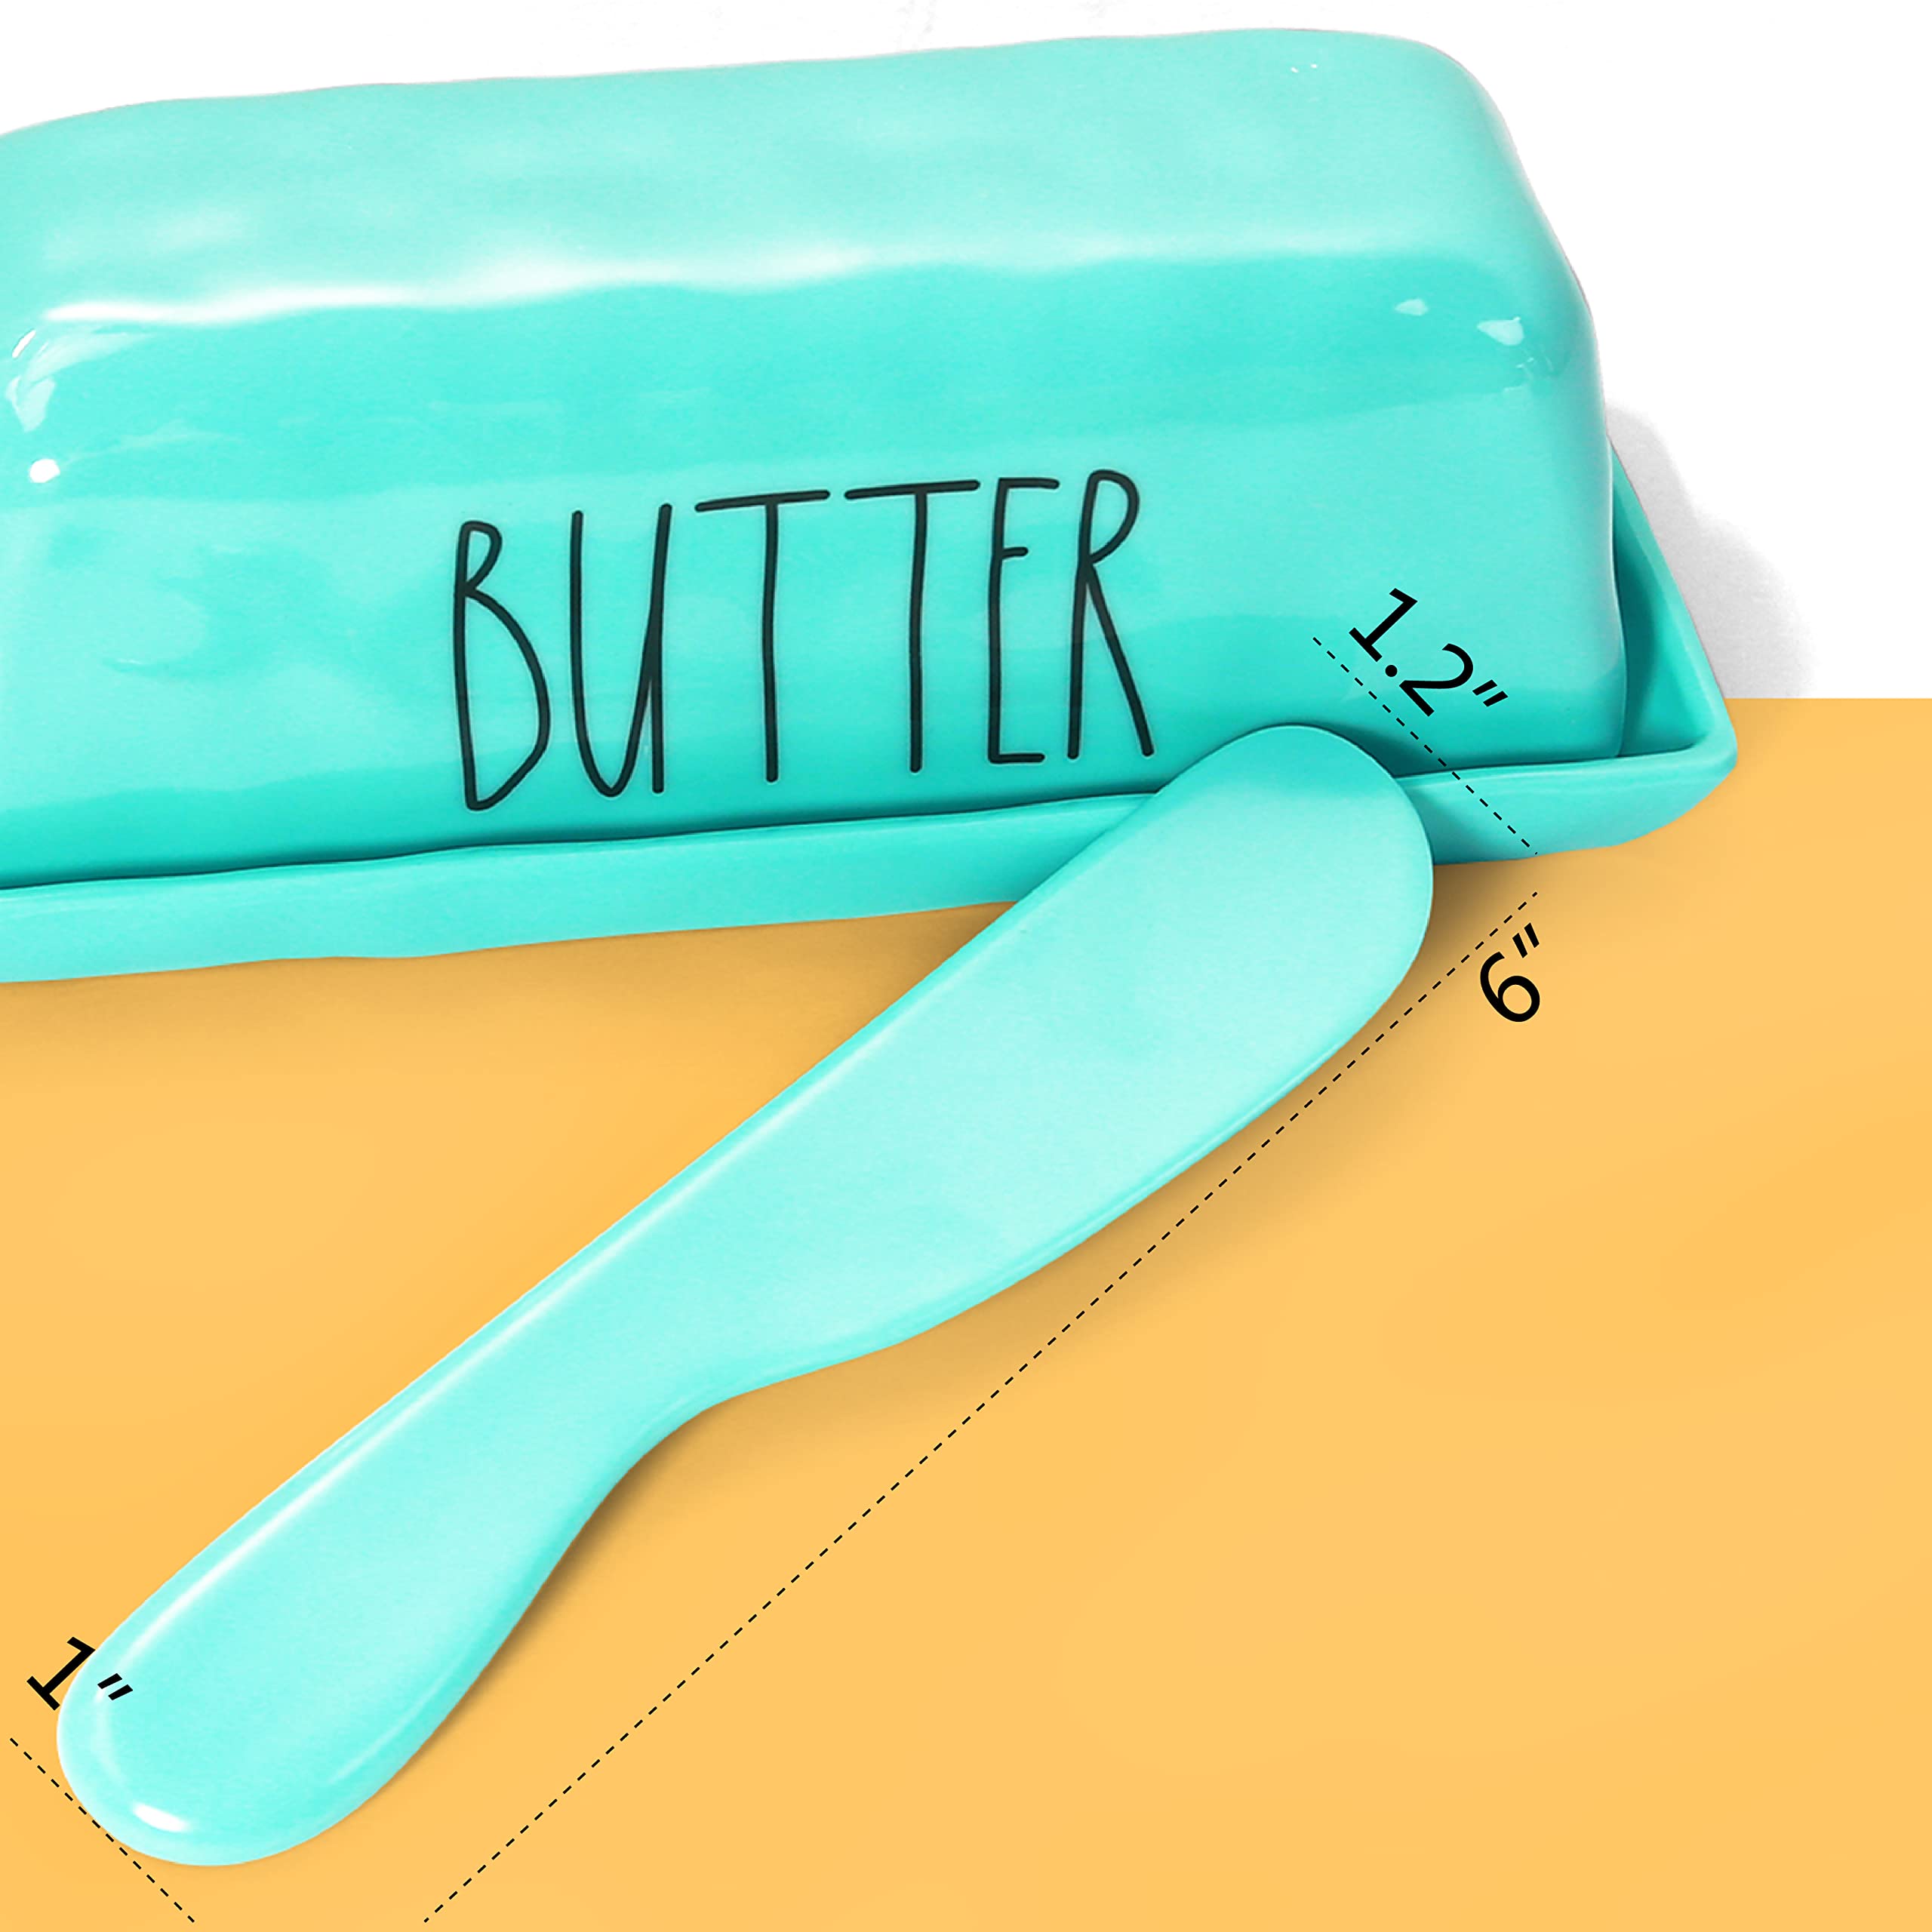 TP Butter Dish with Lid and Knife Polished Design Melamine Butter Keeper, Butter Holder with Cover, Butter Container Holds a Standard Stick of Butter, Dishwasher Safe (Teal)